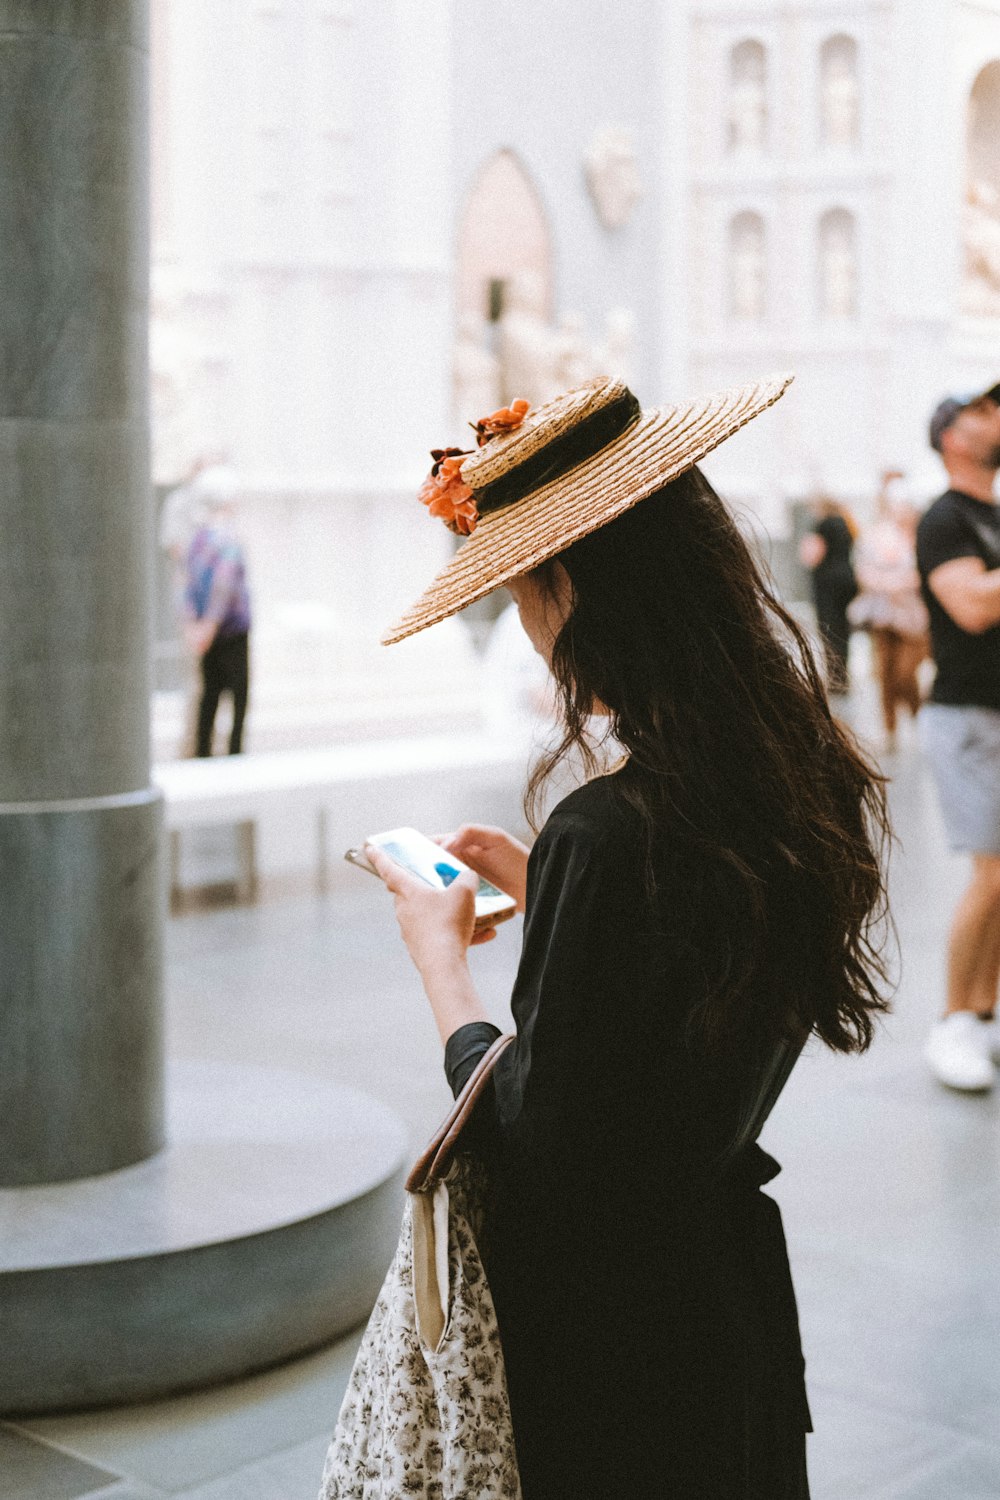 a woman wearing a hat and holding a cell phone